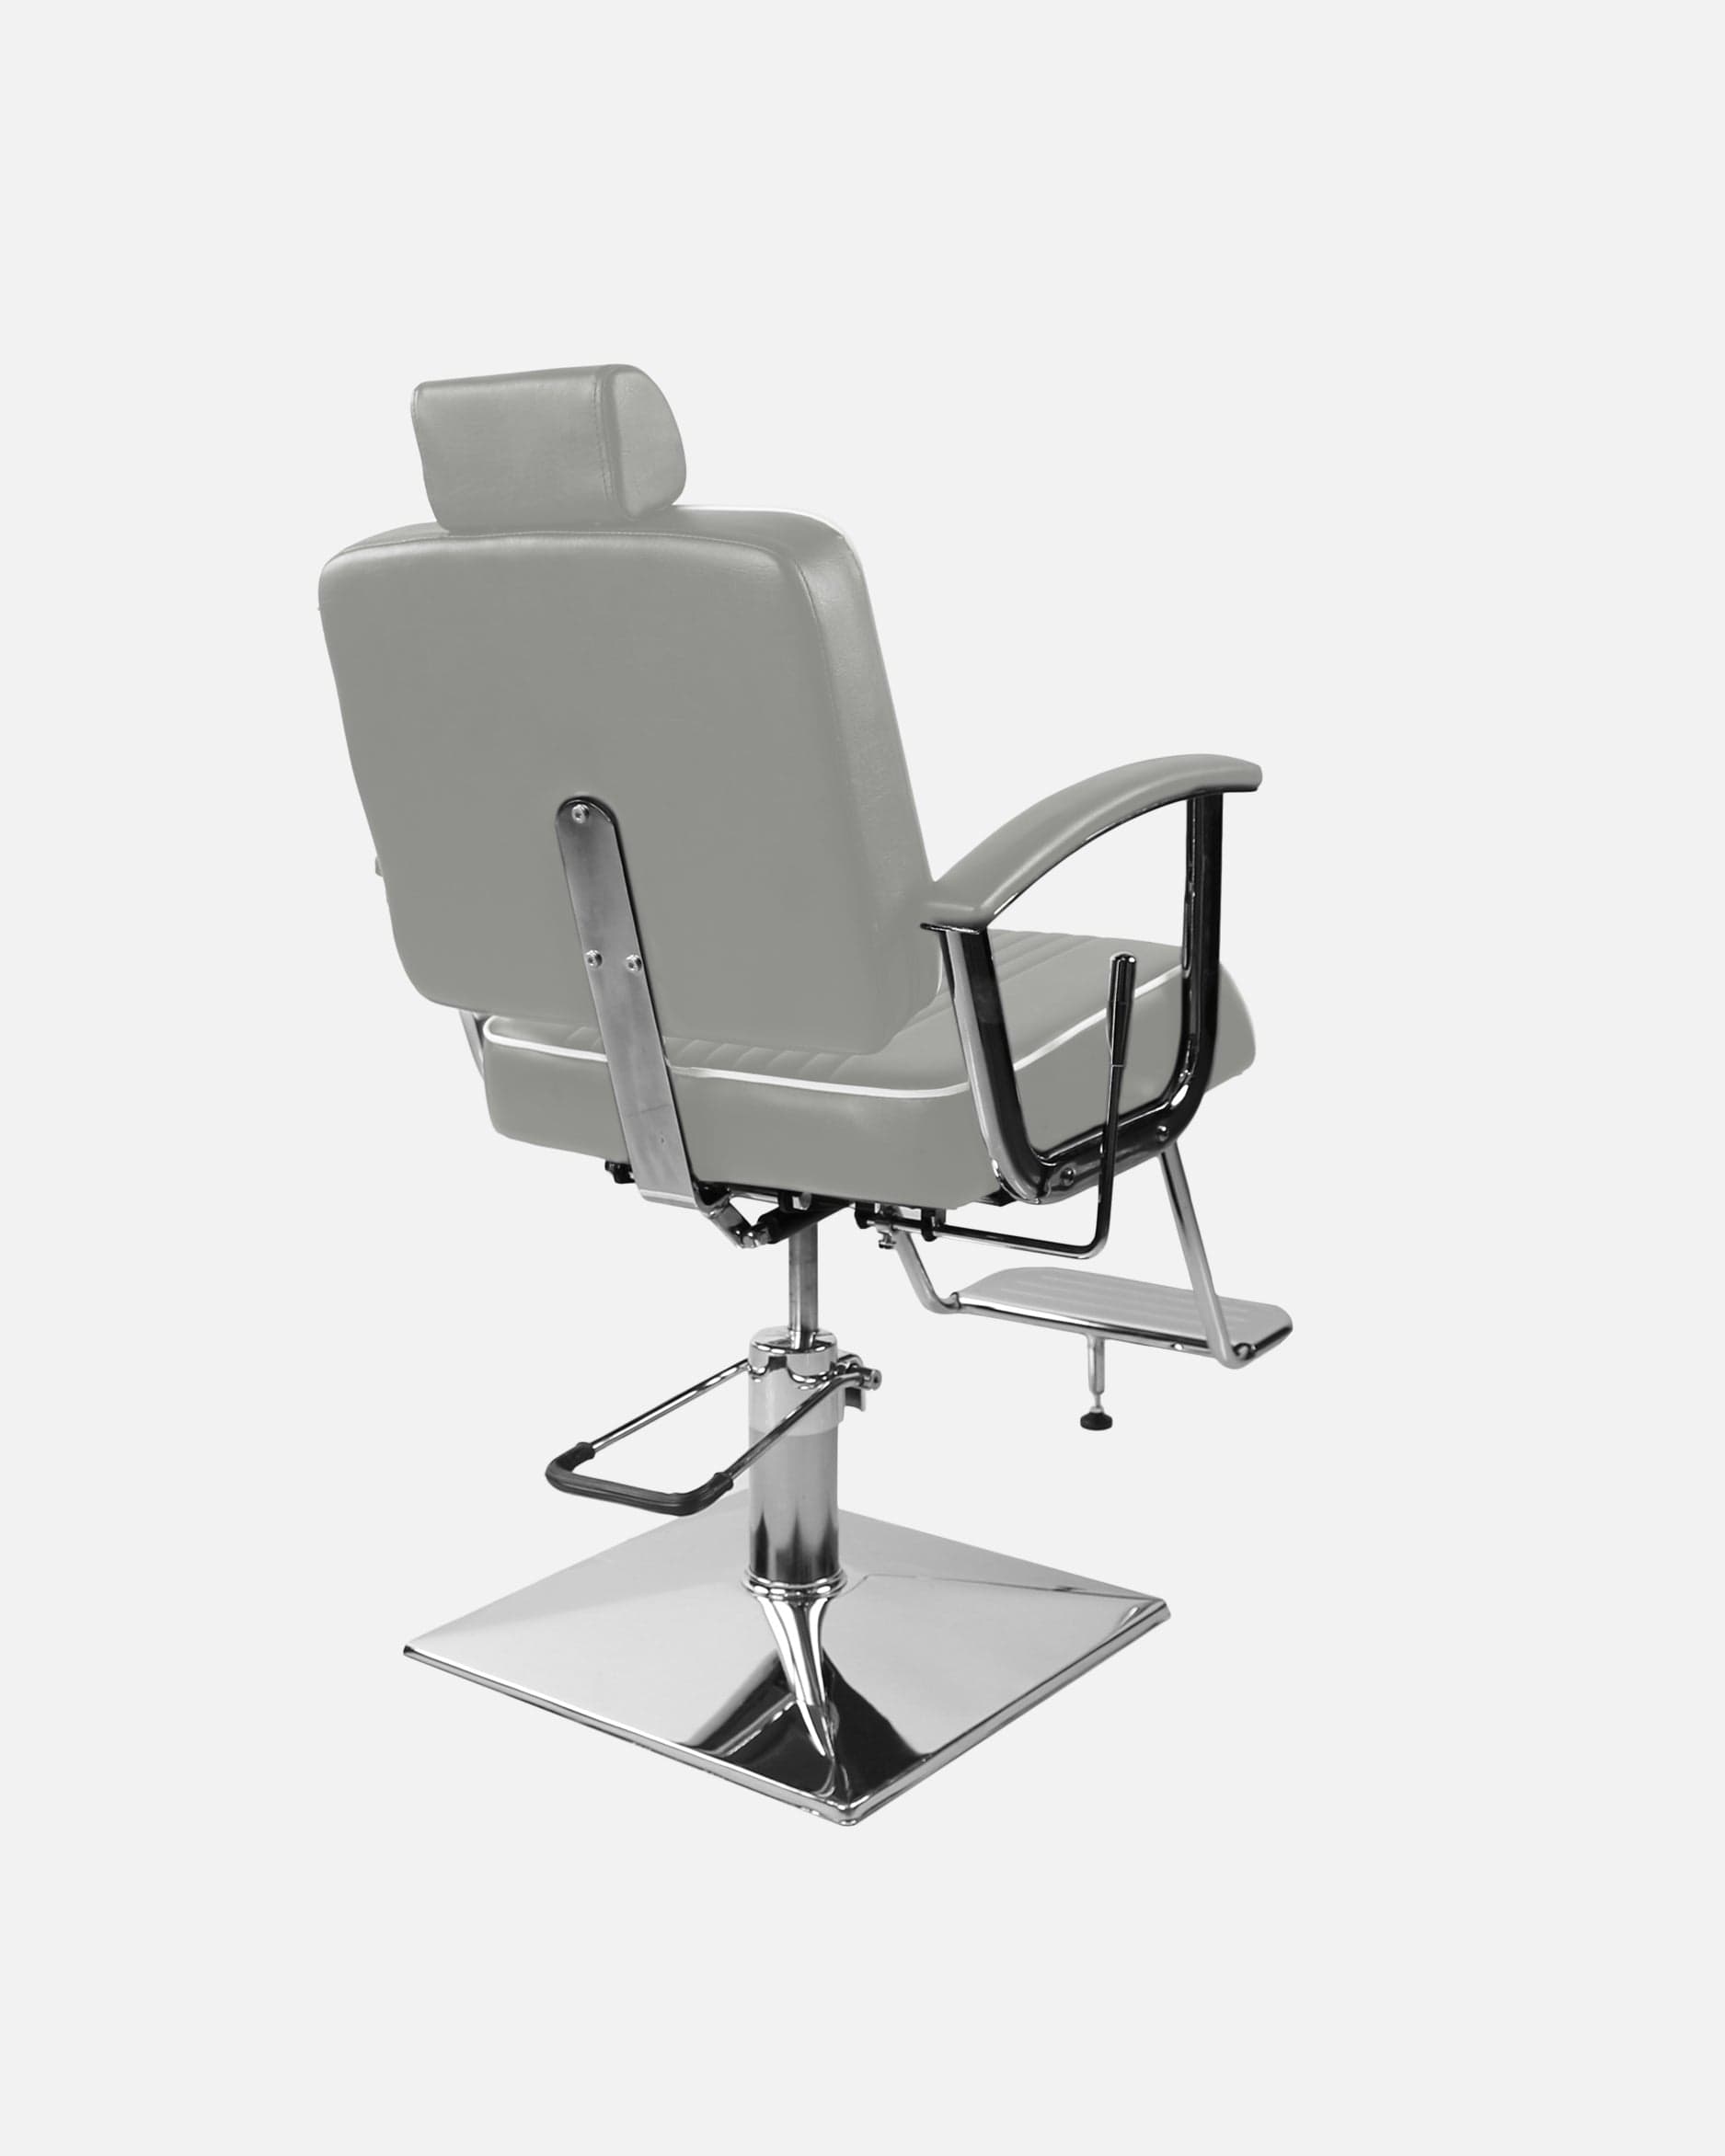 johnbarbersons Chairs The Base Gray